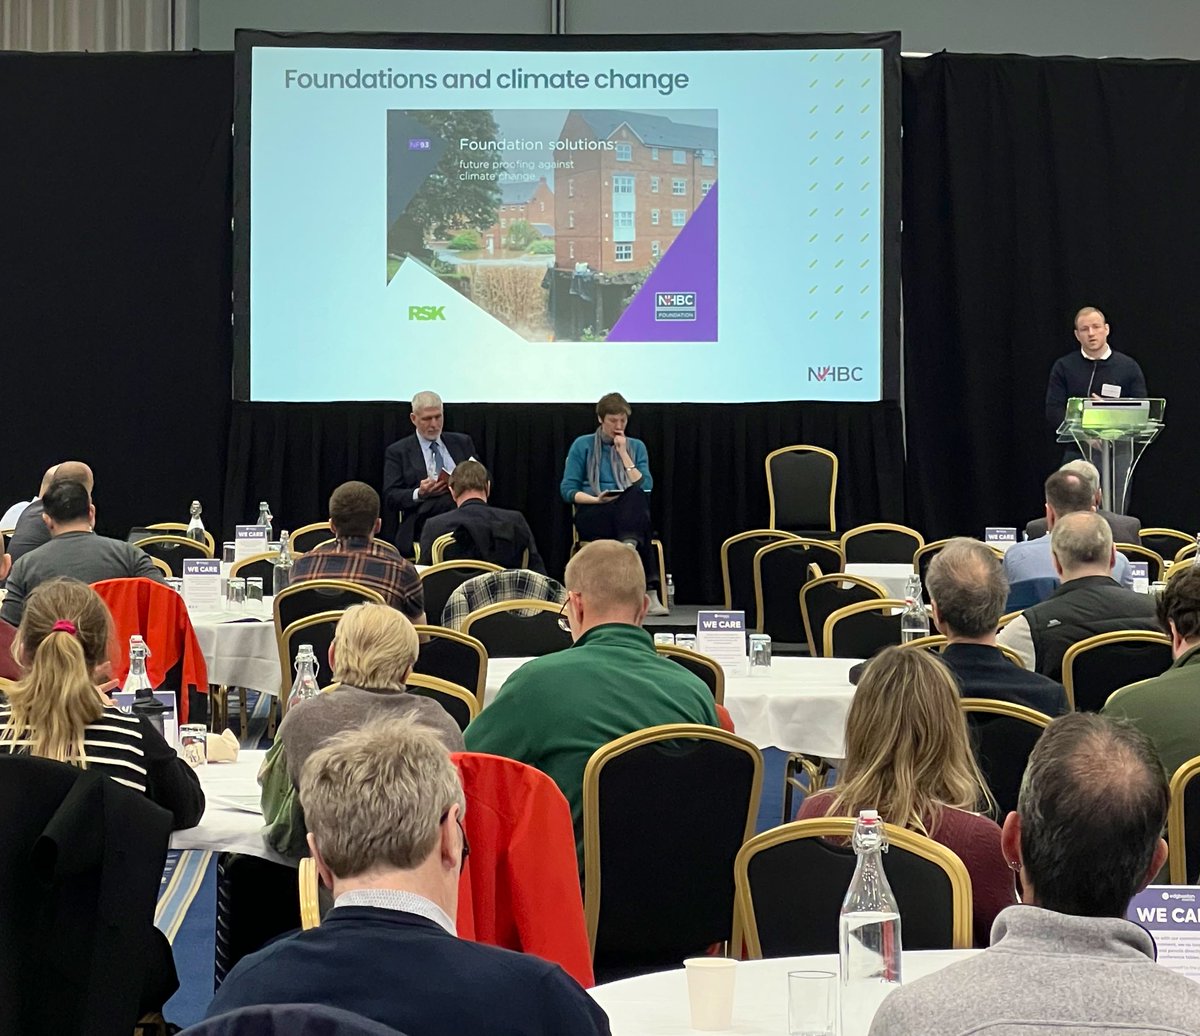 #TPBE5 Session Seven has begun, chaired by Jim Smith MICFor from the @ForestryComm and curated by @TDAG_TalkTree and @UDGUrbanUpdate. The first speaker is Daniel Hicks MCABE CBuildE who is sharing @NHBC’s standards and guidance on foundation design for trees & net zero carbon.